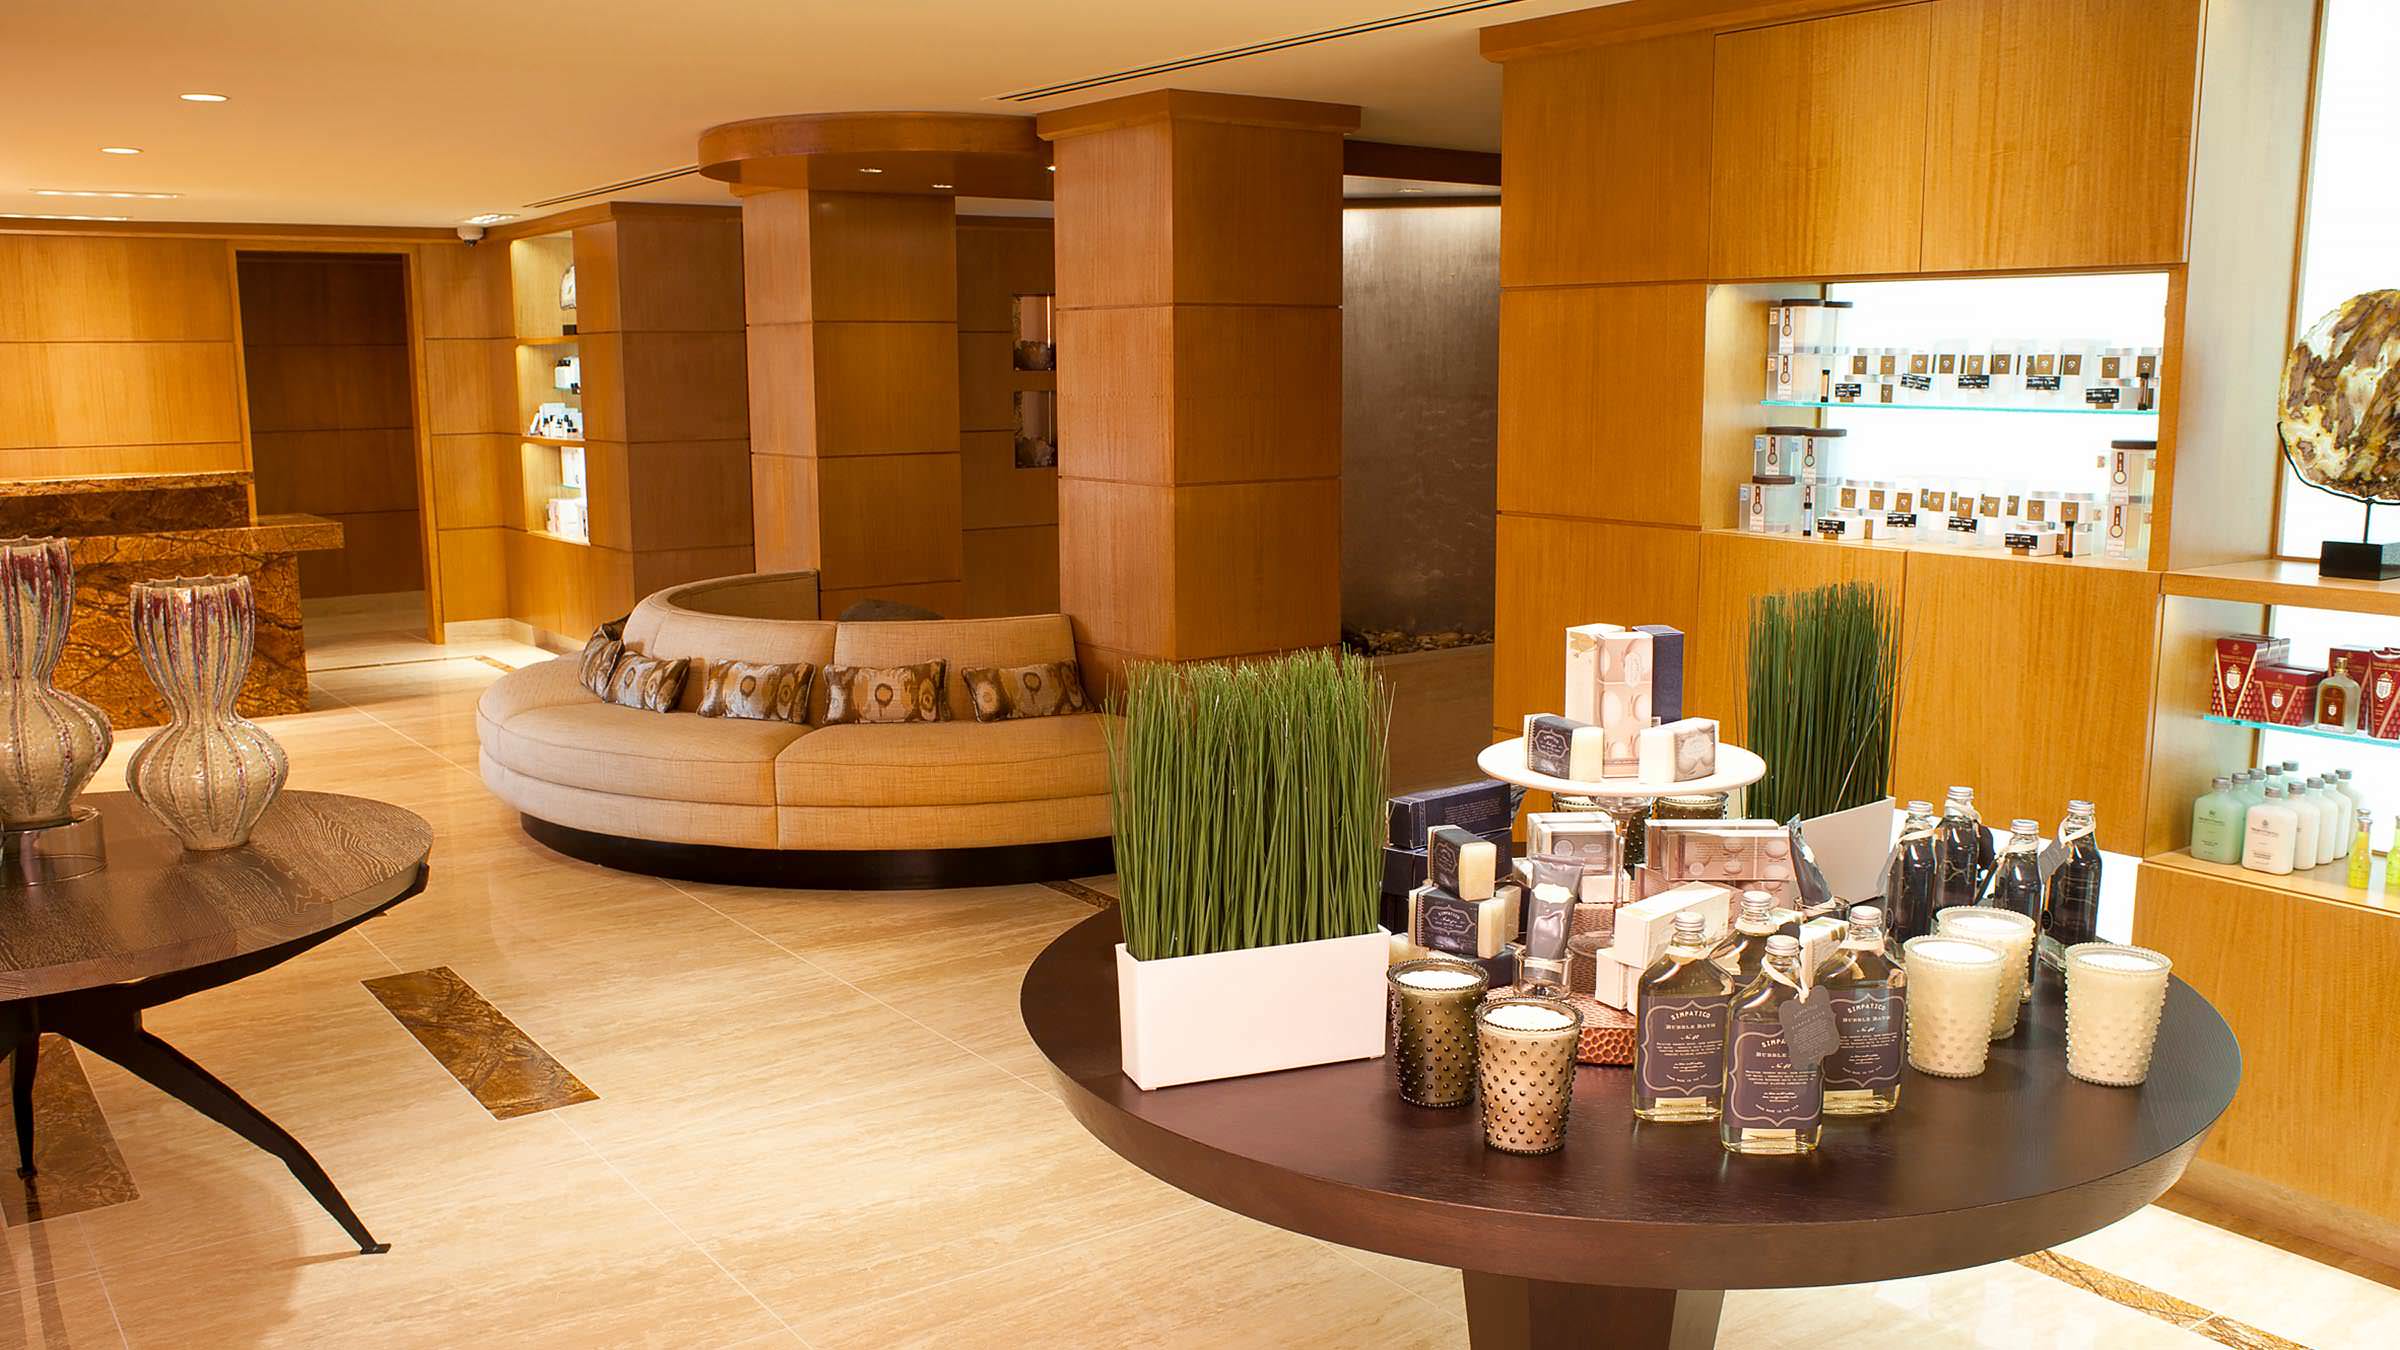 Grand Spa retail space with waiting area, water feature, and spa products.